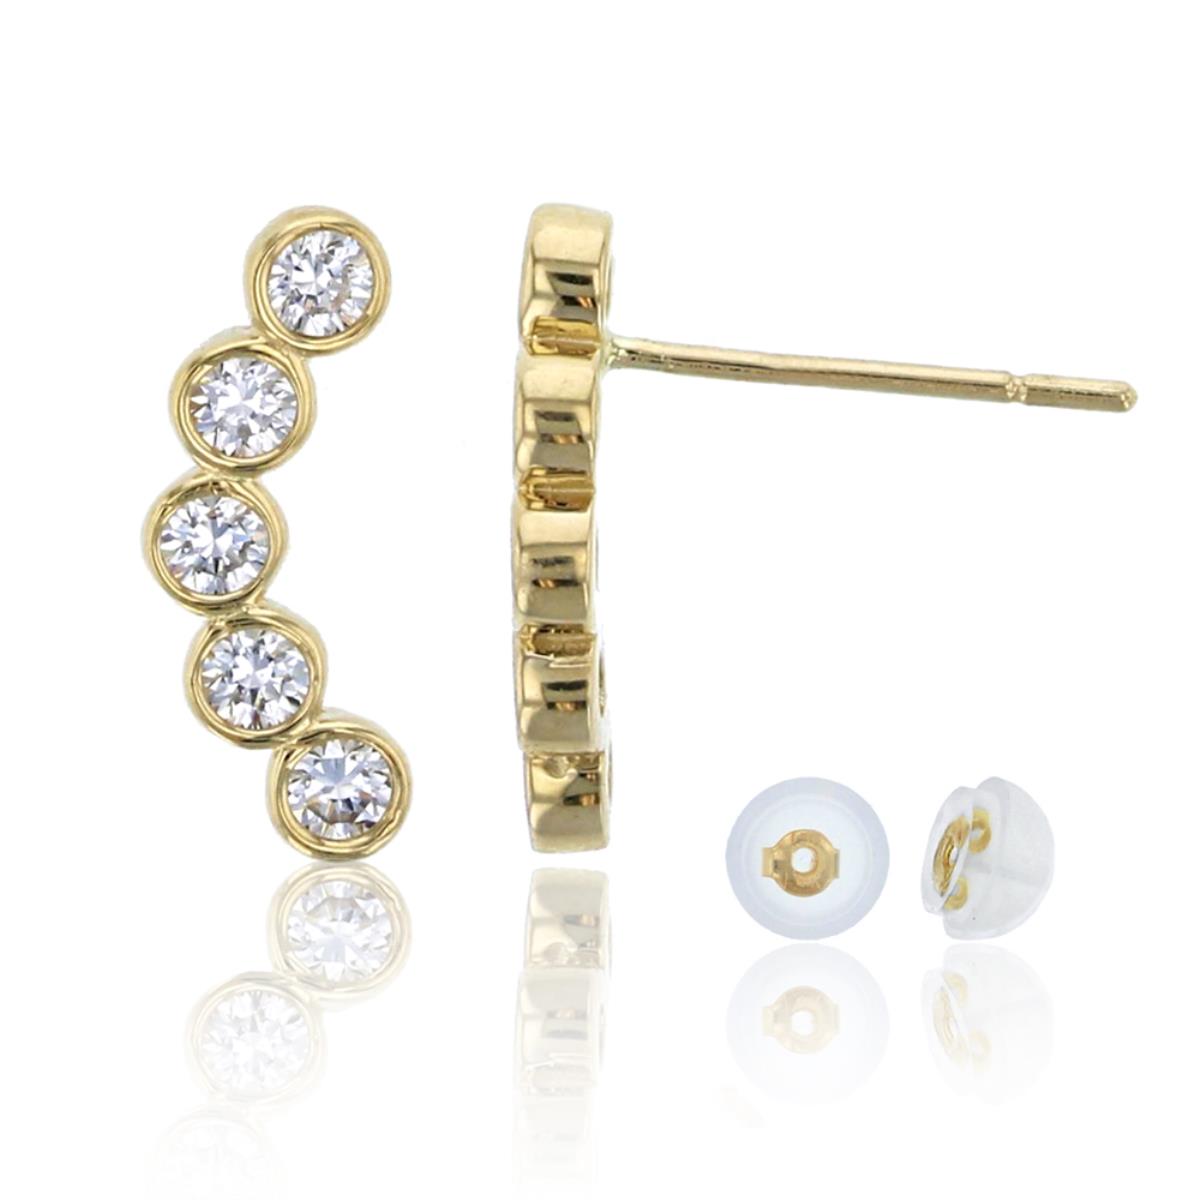 10K Yellow Gold 5-Stones Bezel Curved Bar CZ Stud Earring & 10K Silicone Back